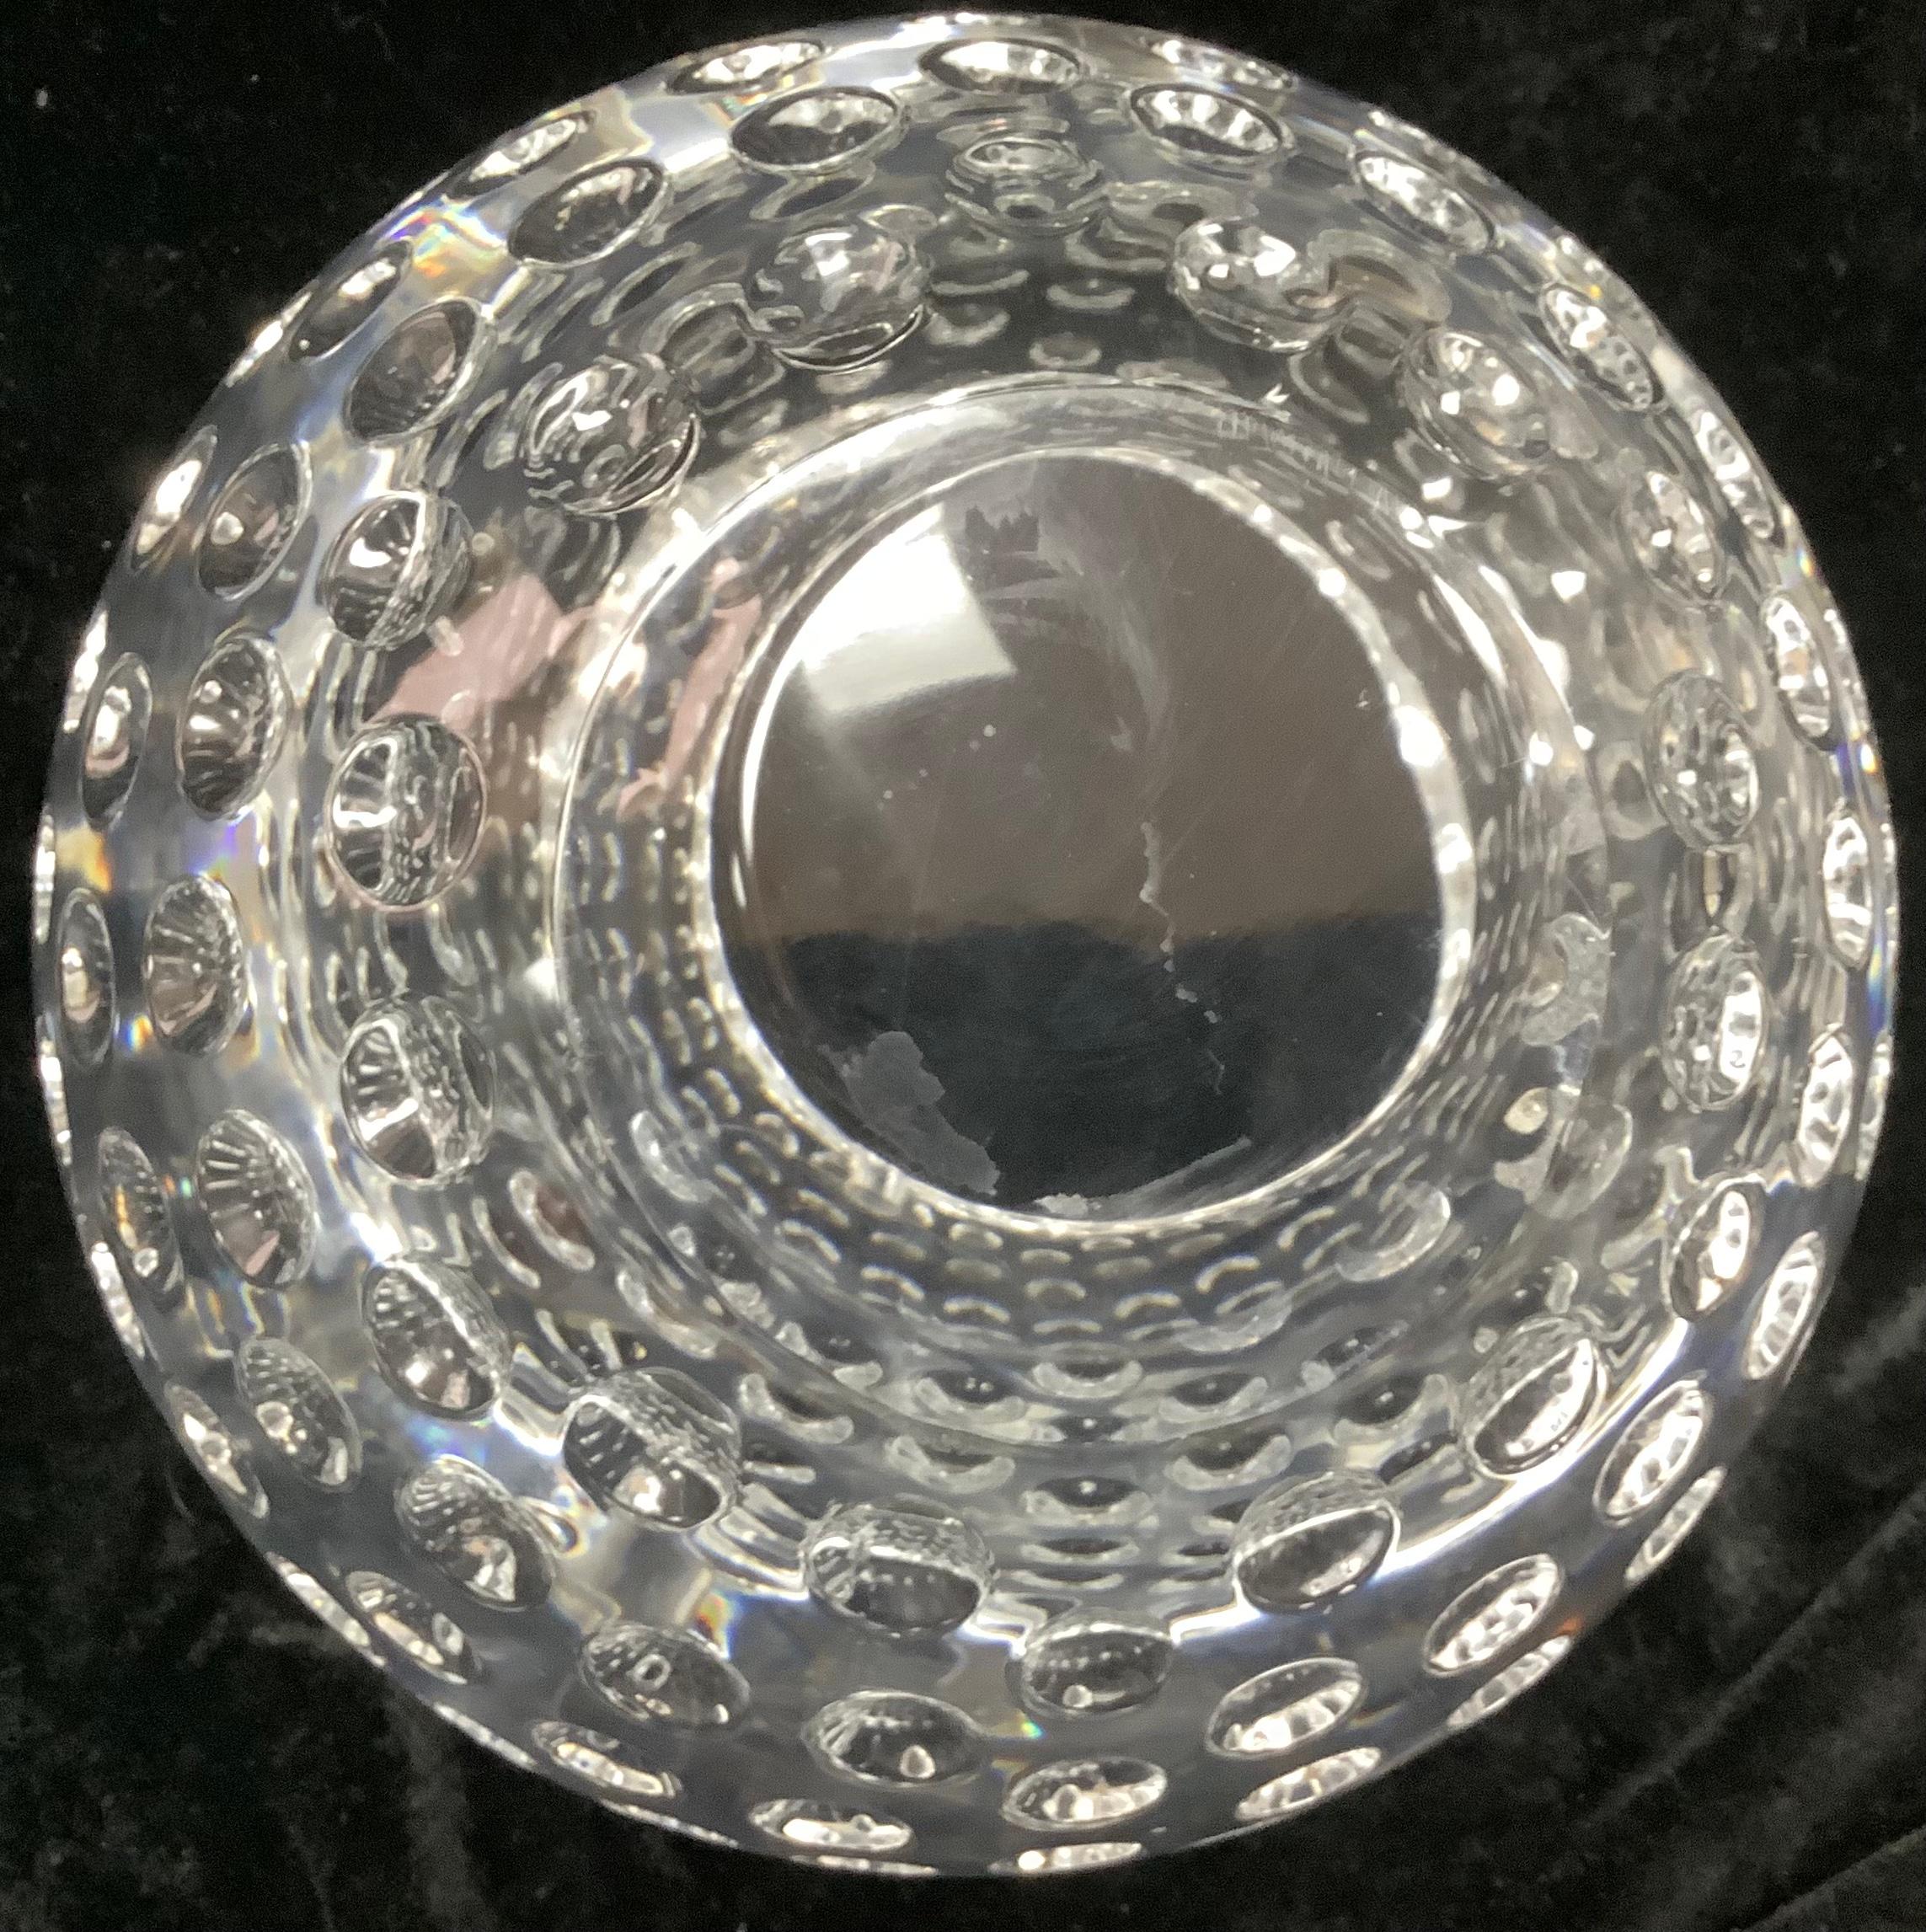 A very unique spherical ice bucket with bubble pattern, circa 1980s. Swivel top open or close mechanism. Excellent condition with no chips, cracks or scratches. Very nice functional design.